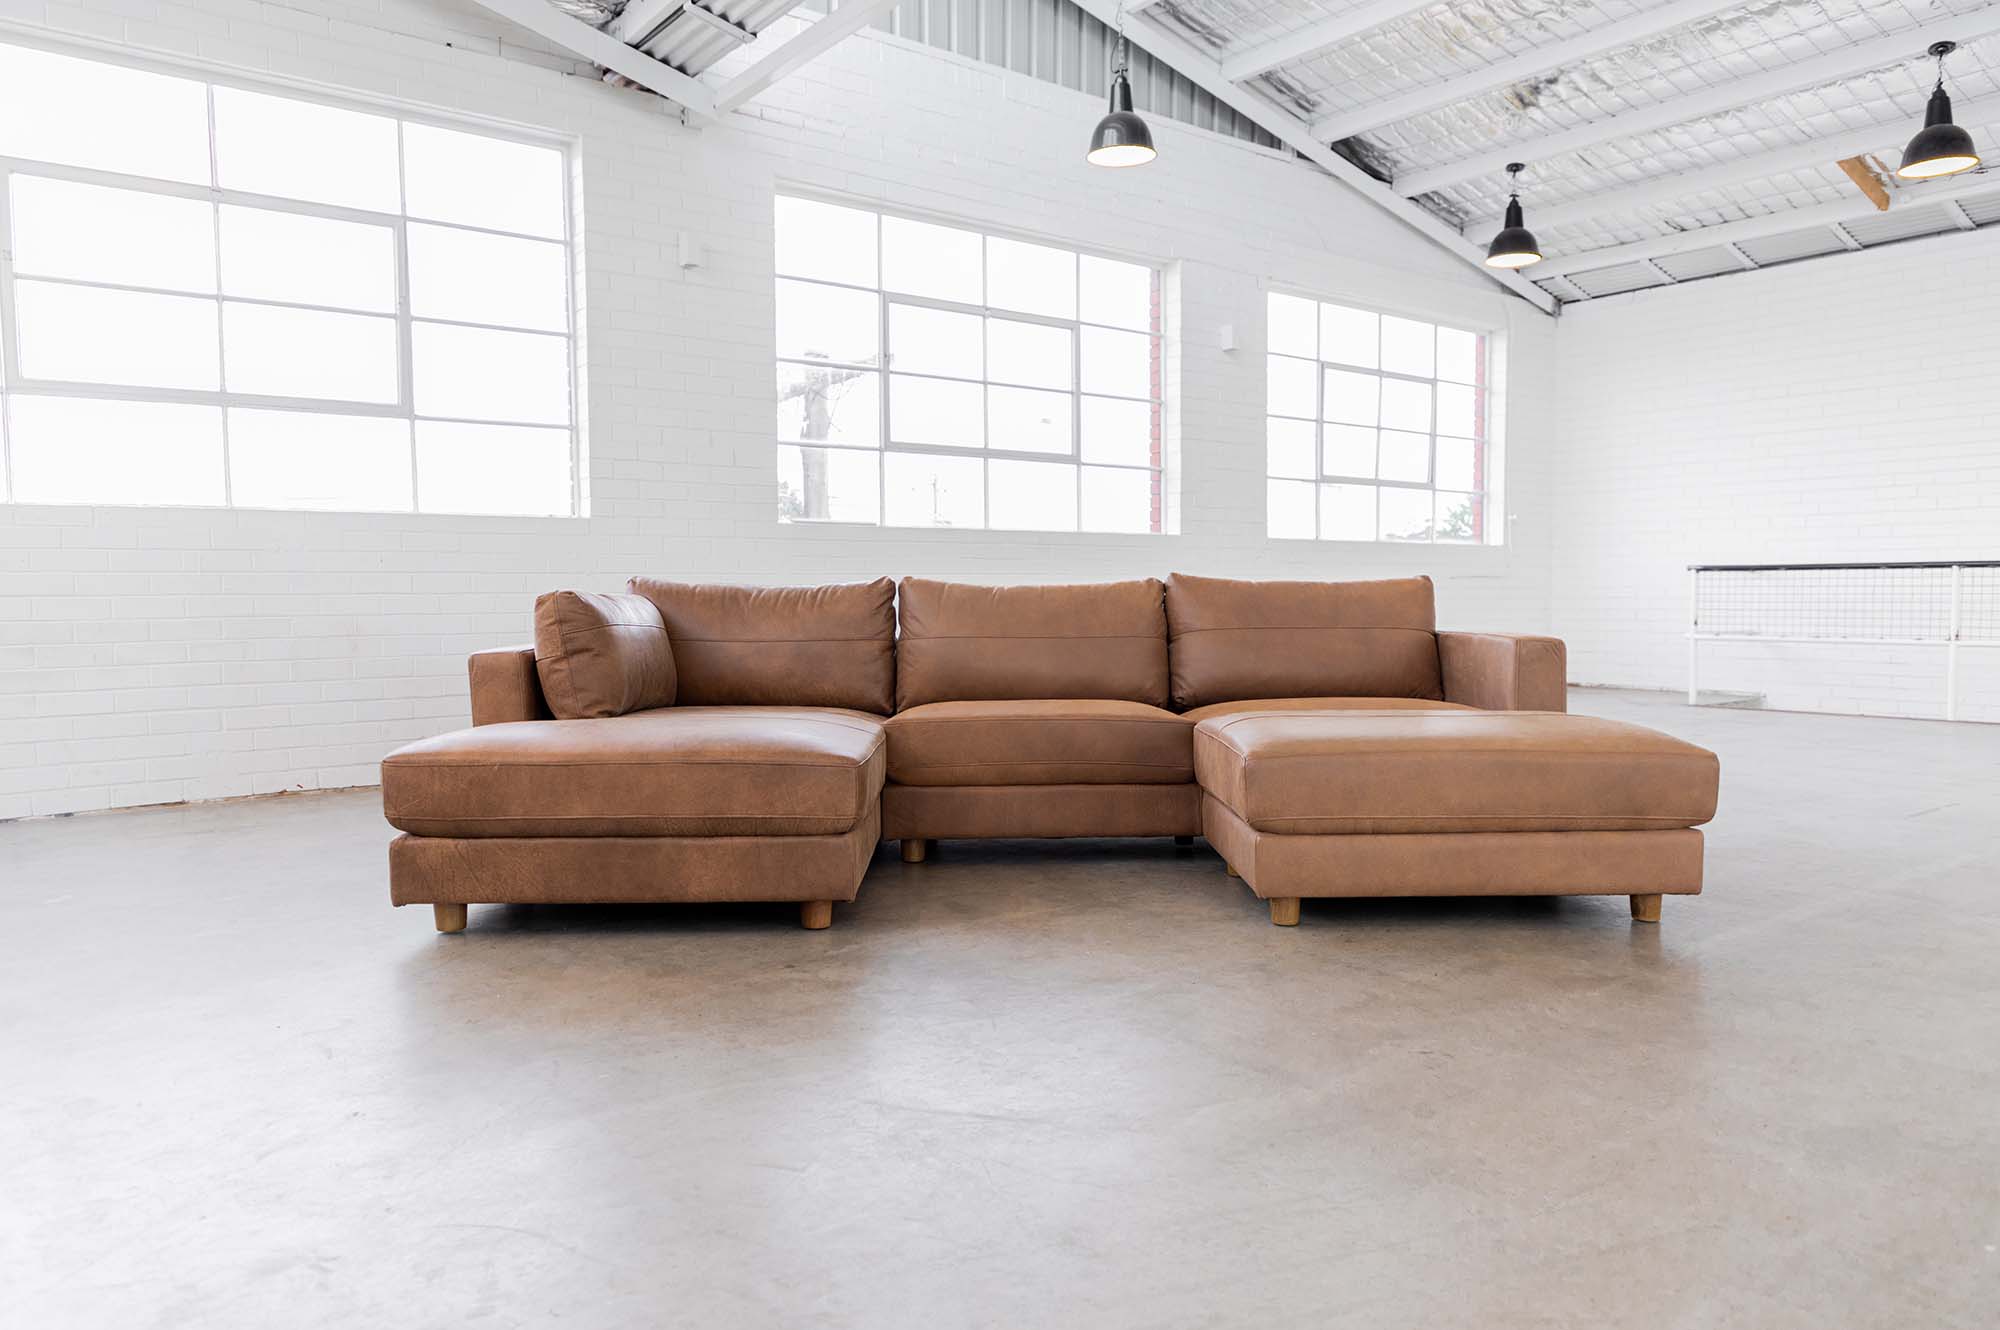 How To Care For Your Leather Sofa